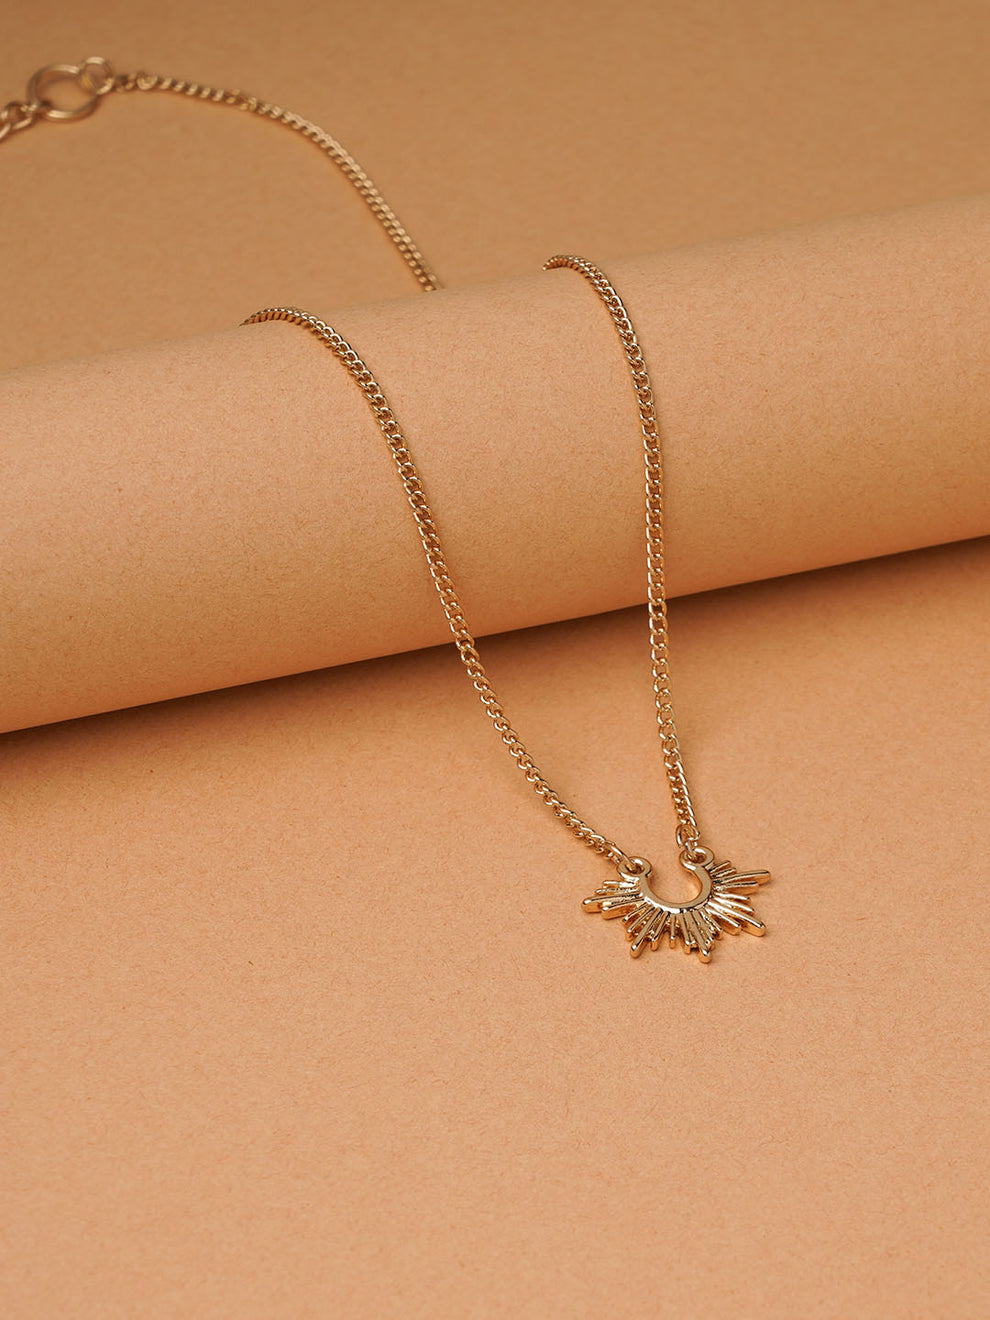 Sun Moon Star Necklaces | Chain Necklace Jewelry | Long Pendant Necklace -  Star Pendant - Aliexpress